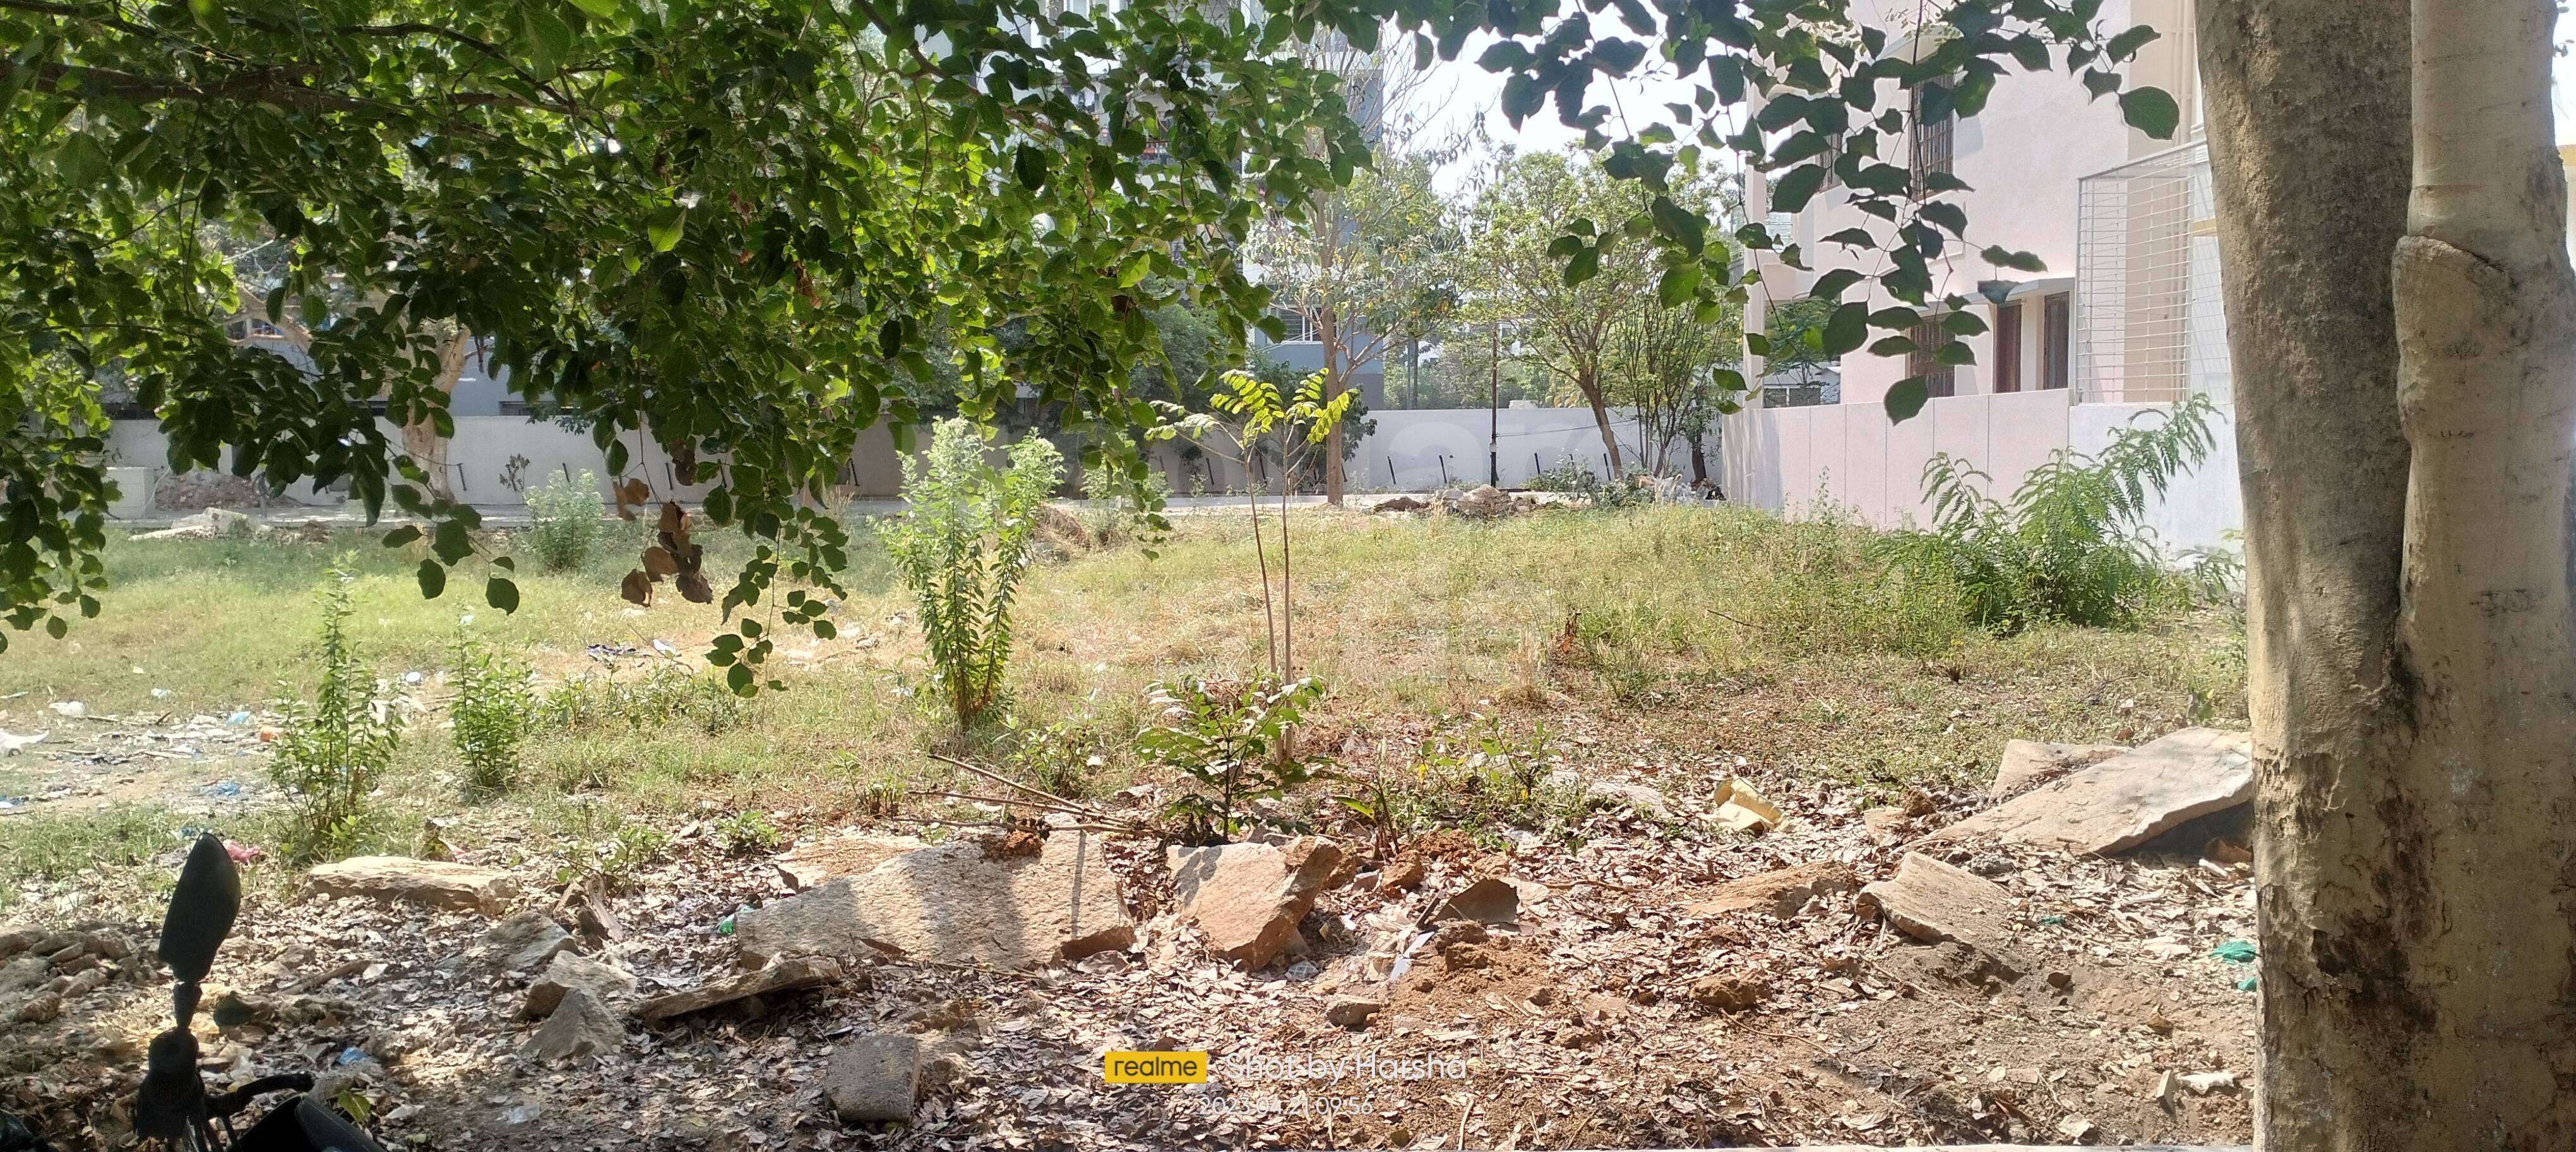 4080px x 1824px - Land/Plots for Sale in Harlur, Bangalore - 5 Resale land / Plots in Harlur